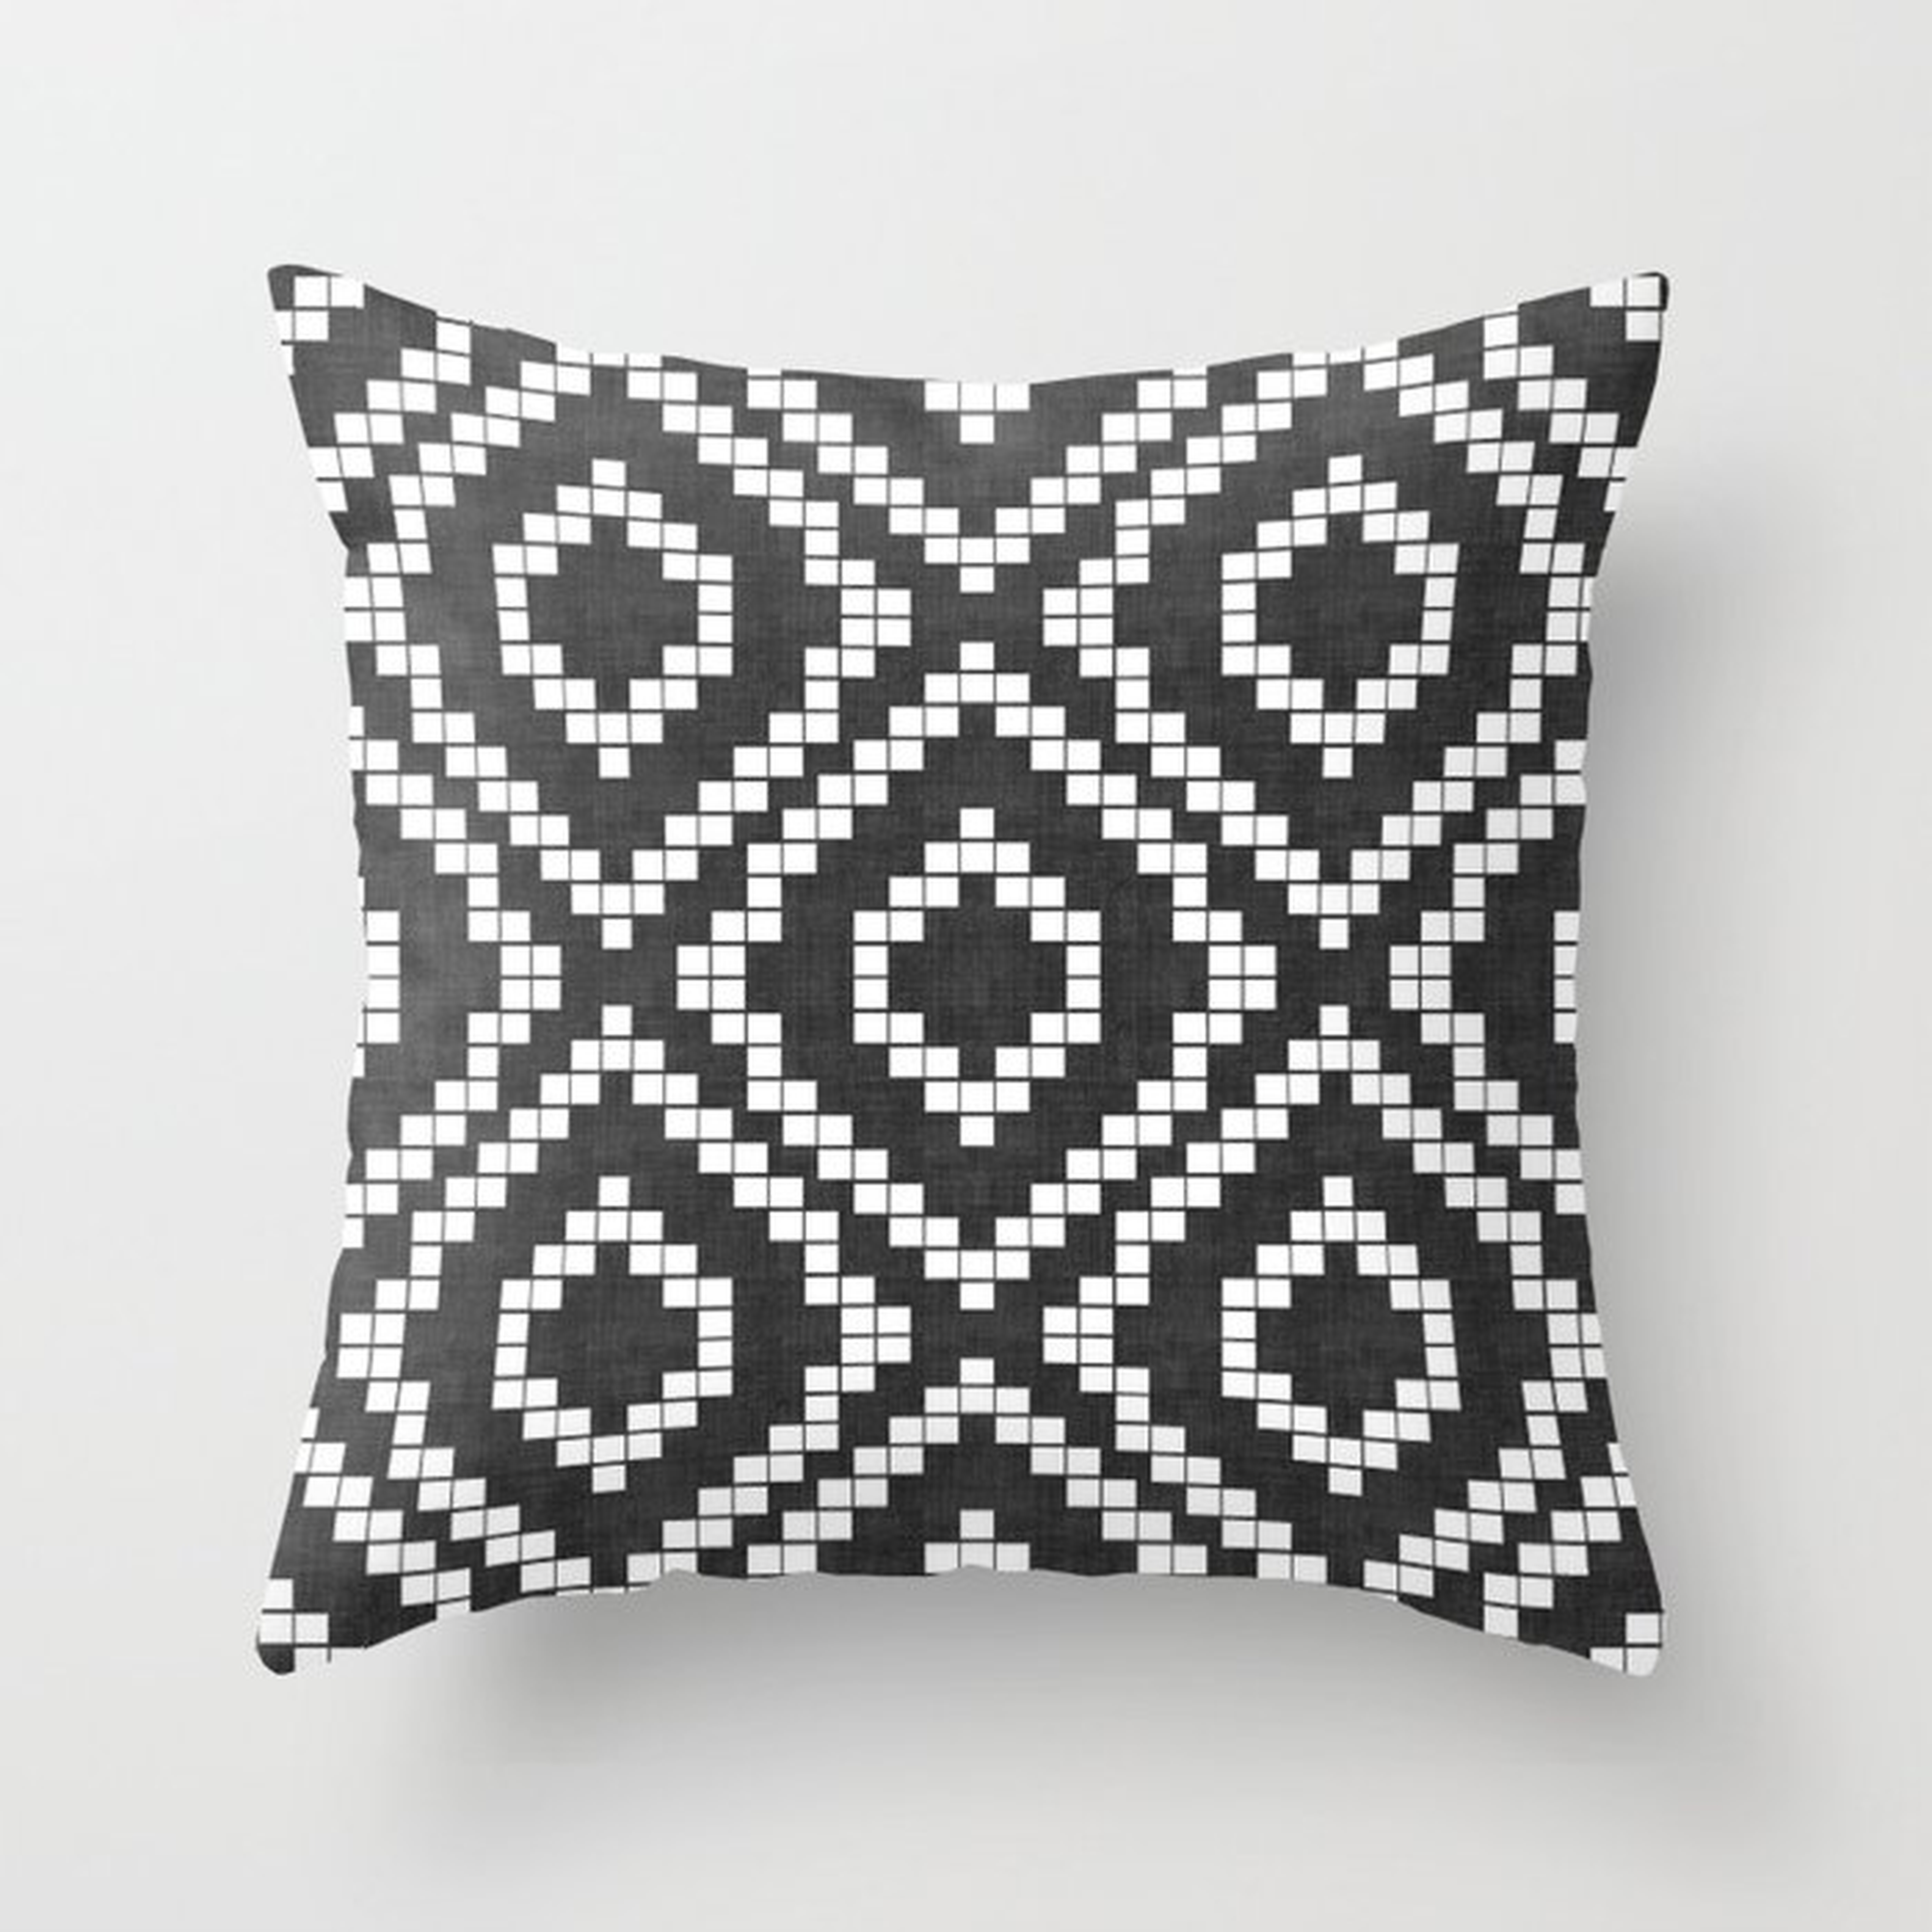 Panja In Black And White Throw Pillow by House Of Haha - Cover (24" x 24") With Pillow Insert - Indoor Pillow - Society6